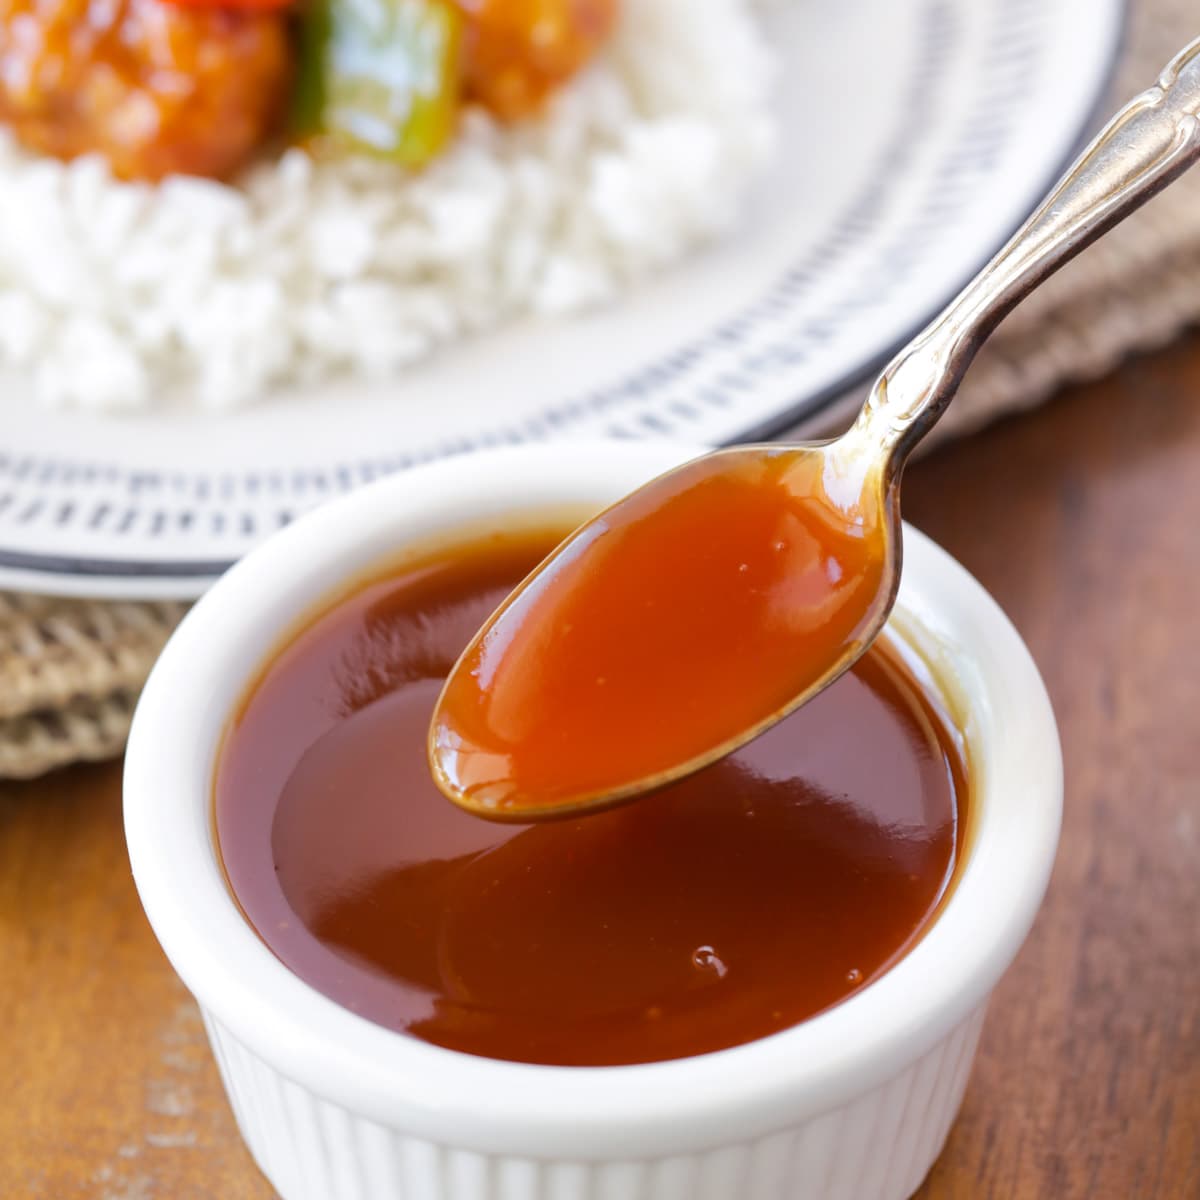 The sauce in a dish for sweet and sour meatballs.